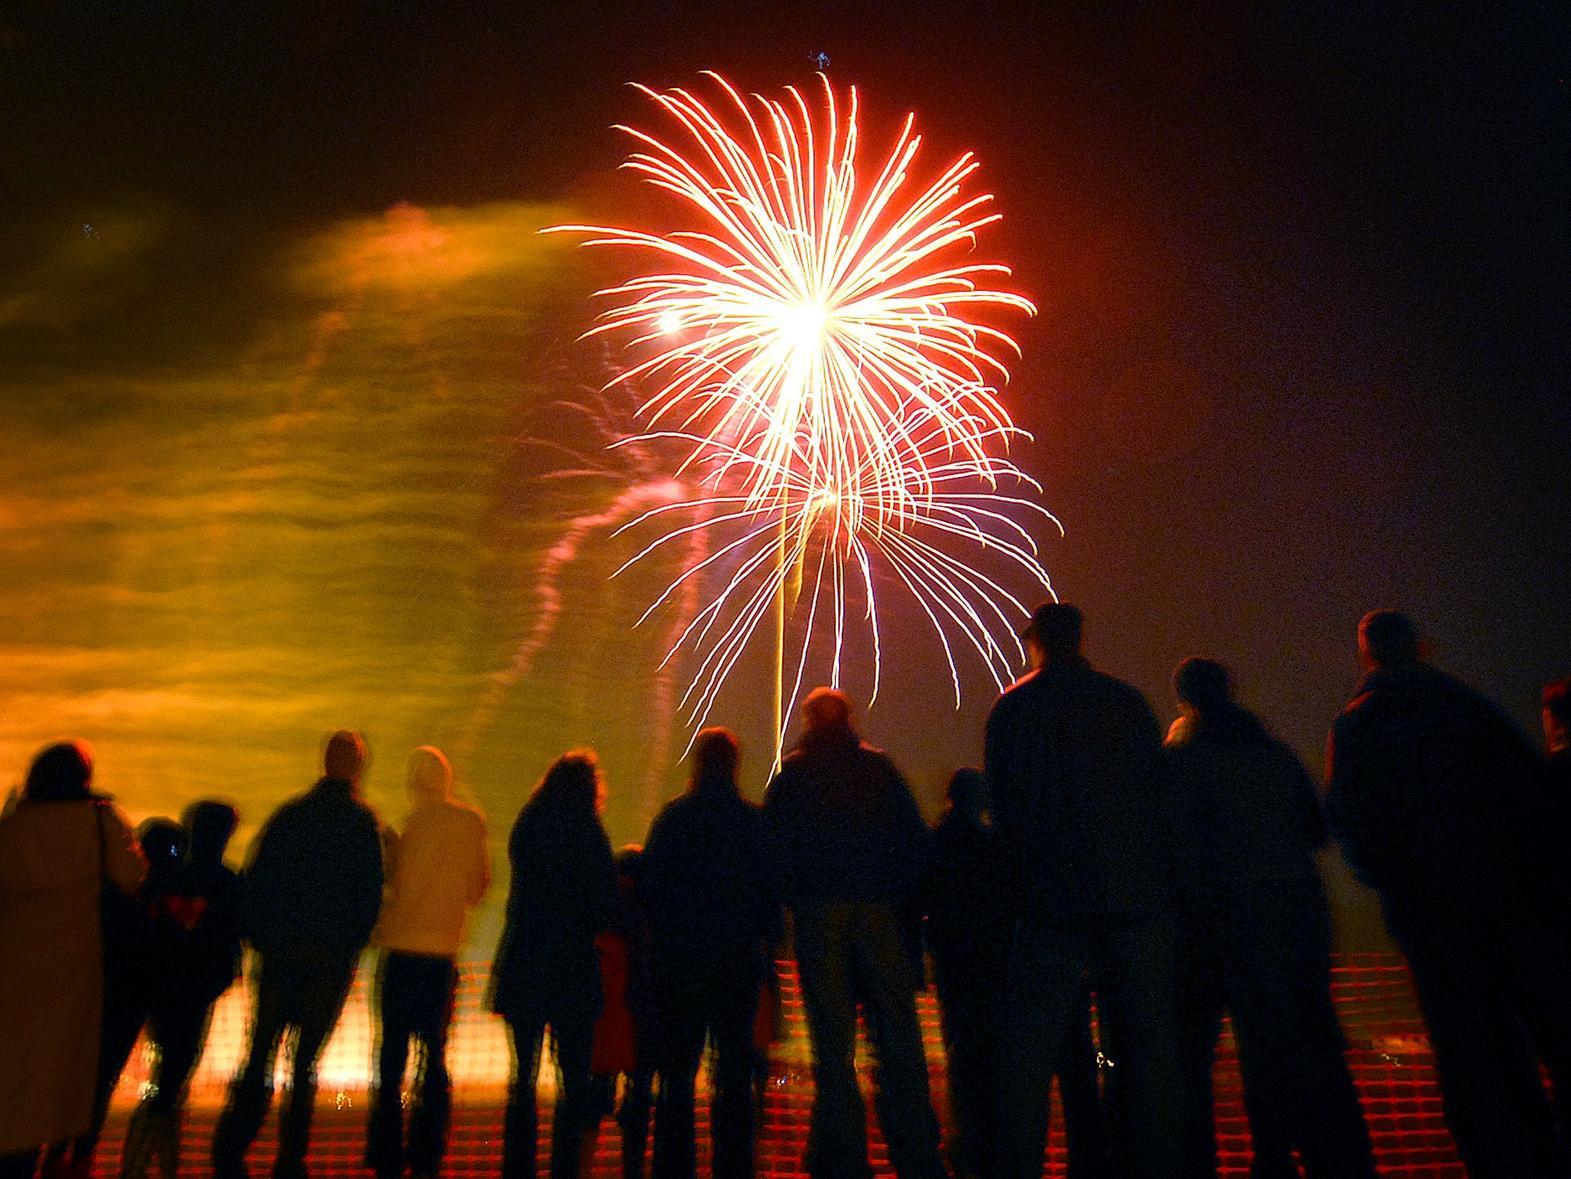 The annual Filey Lions bonfire and fireworks is at West Avenue car park. The bonfire starts at 6.15pm, lantern judging at 6.45pm and fireworks at 7pm.